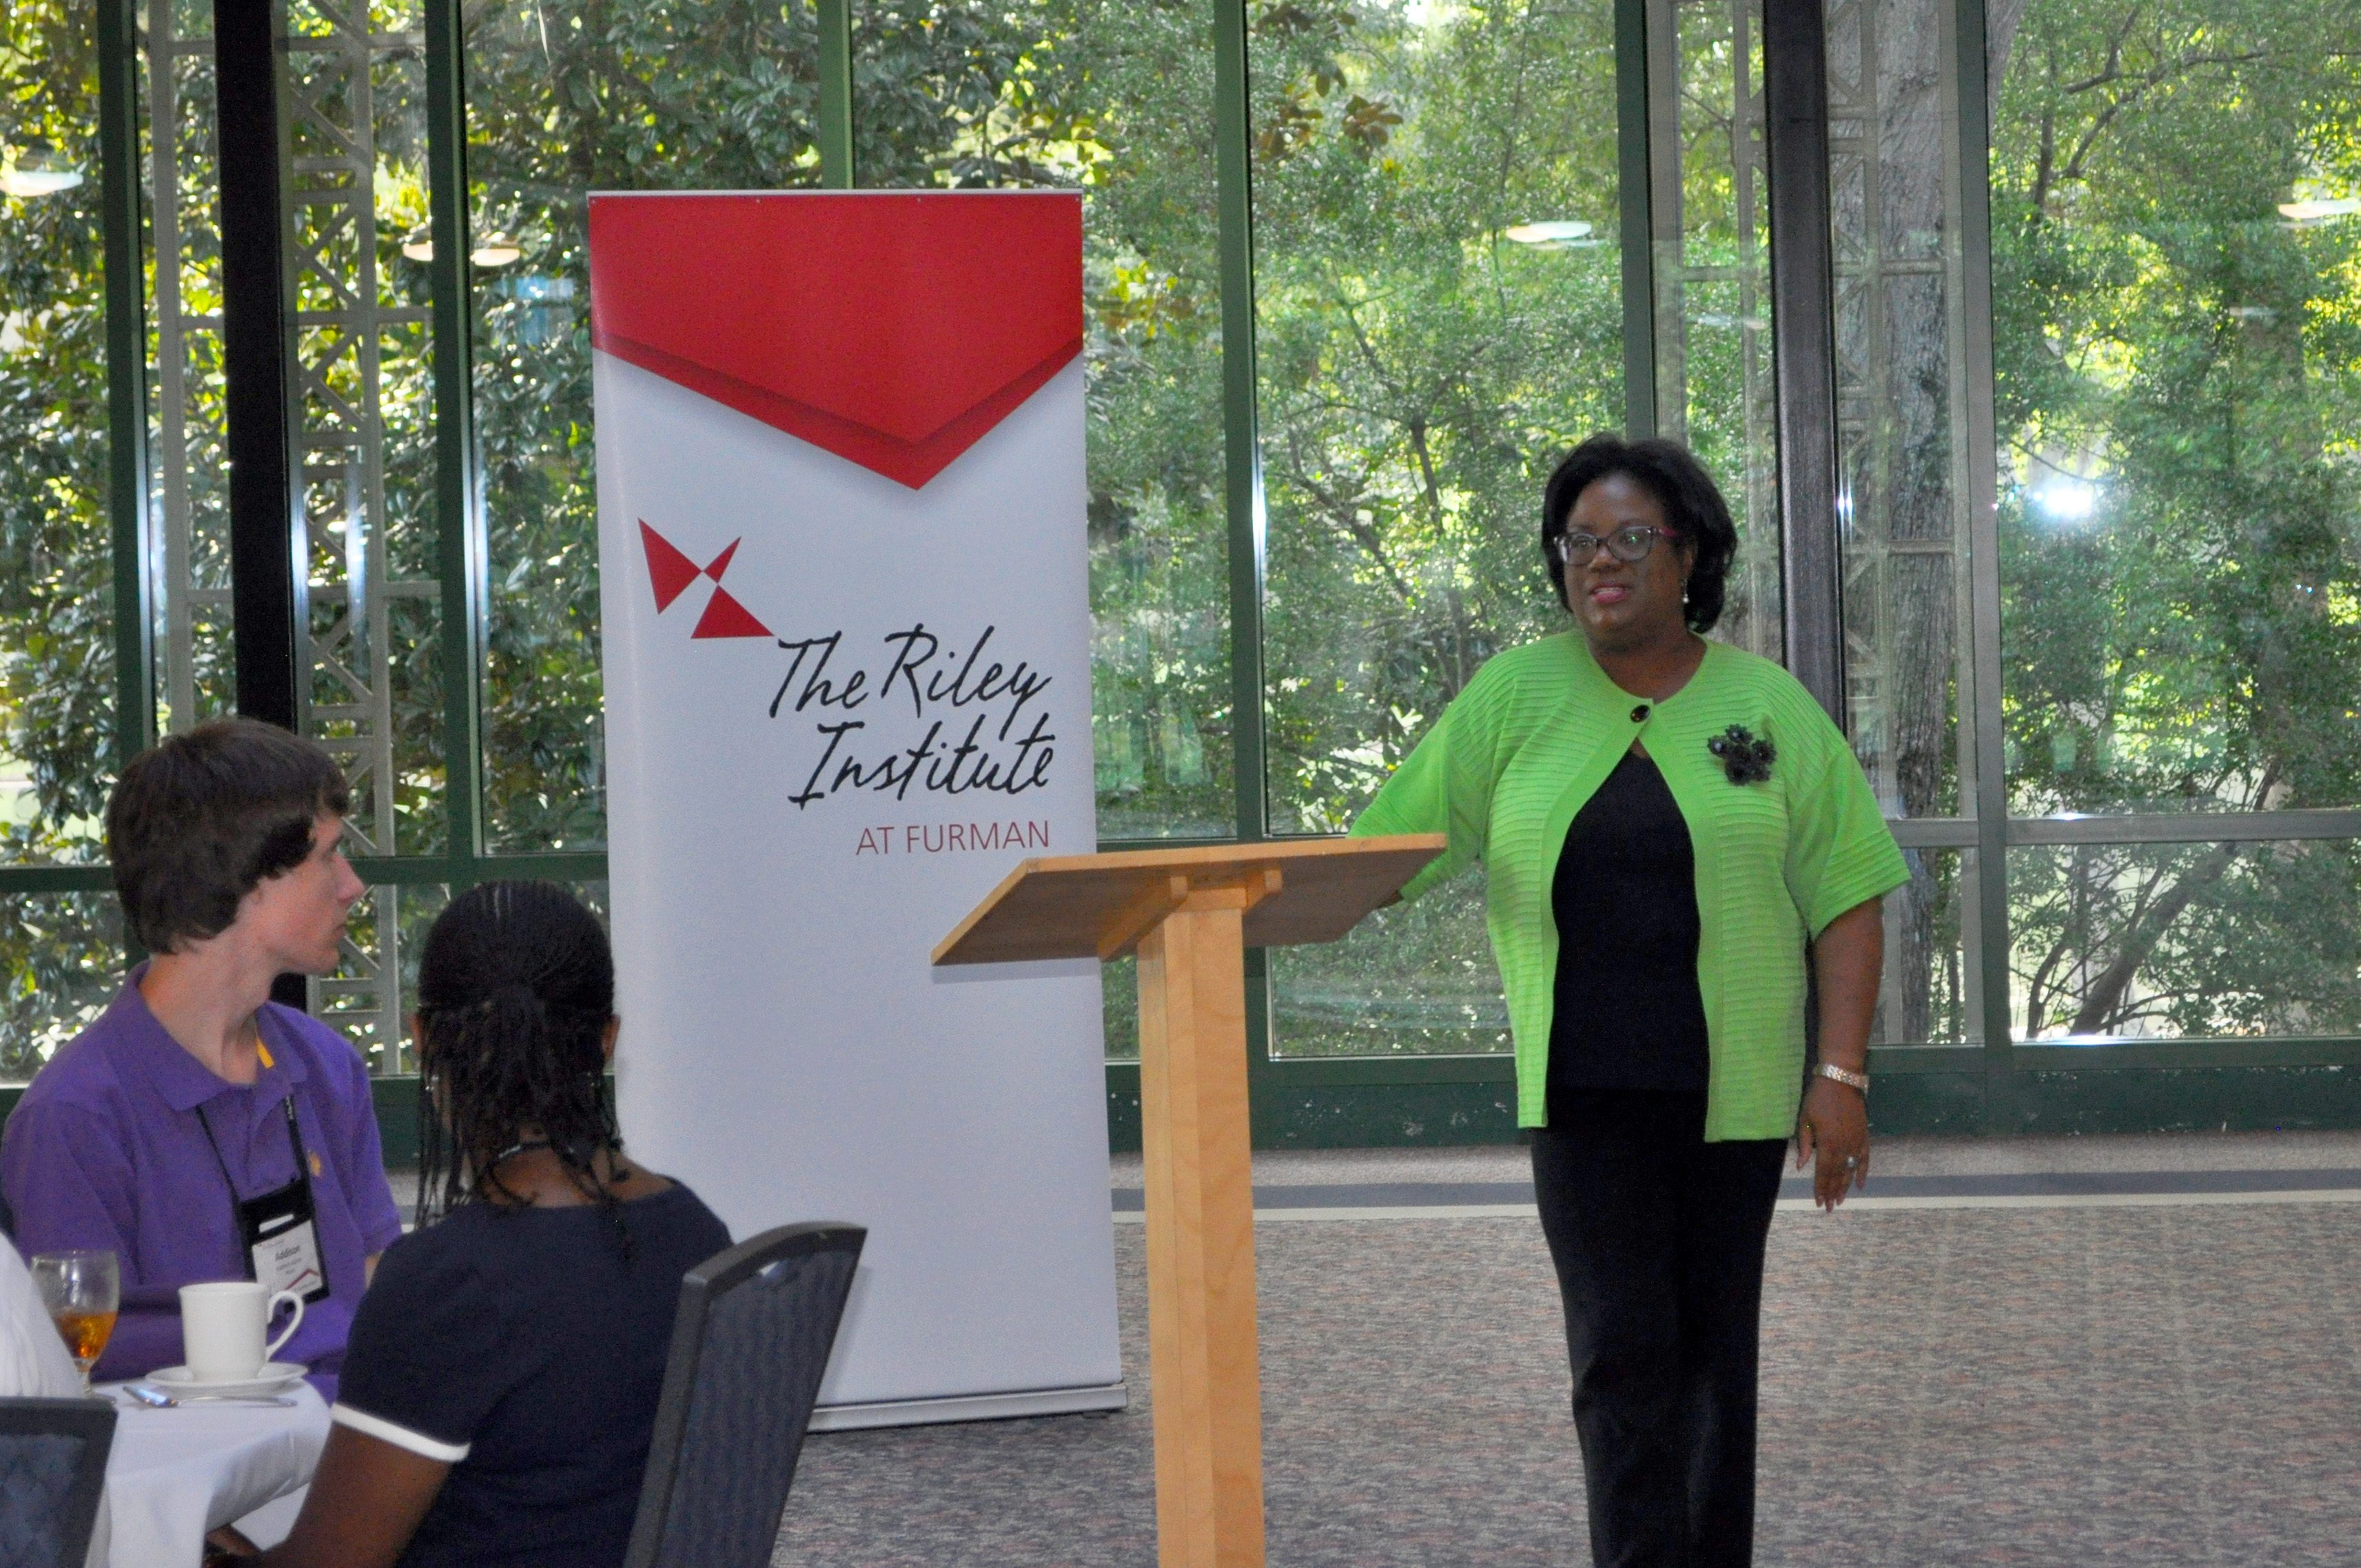 Rep. Chandra Dillard speaking during the Welcome Luncheon